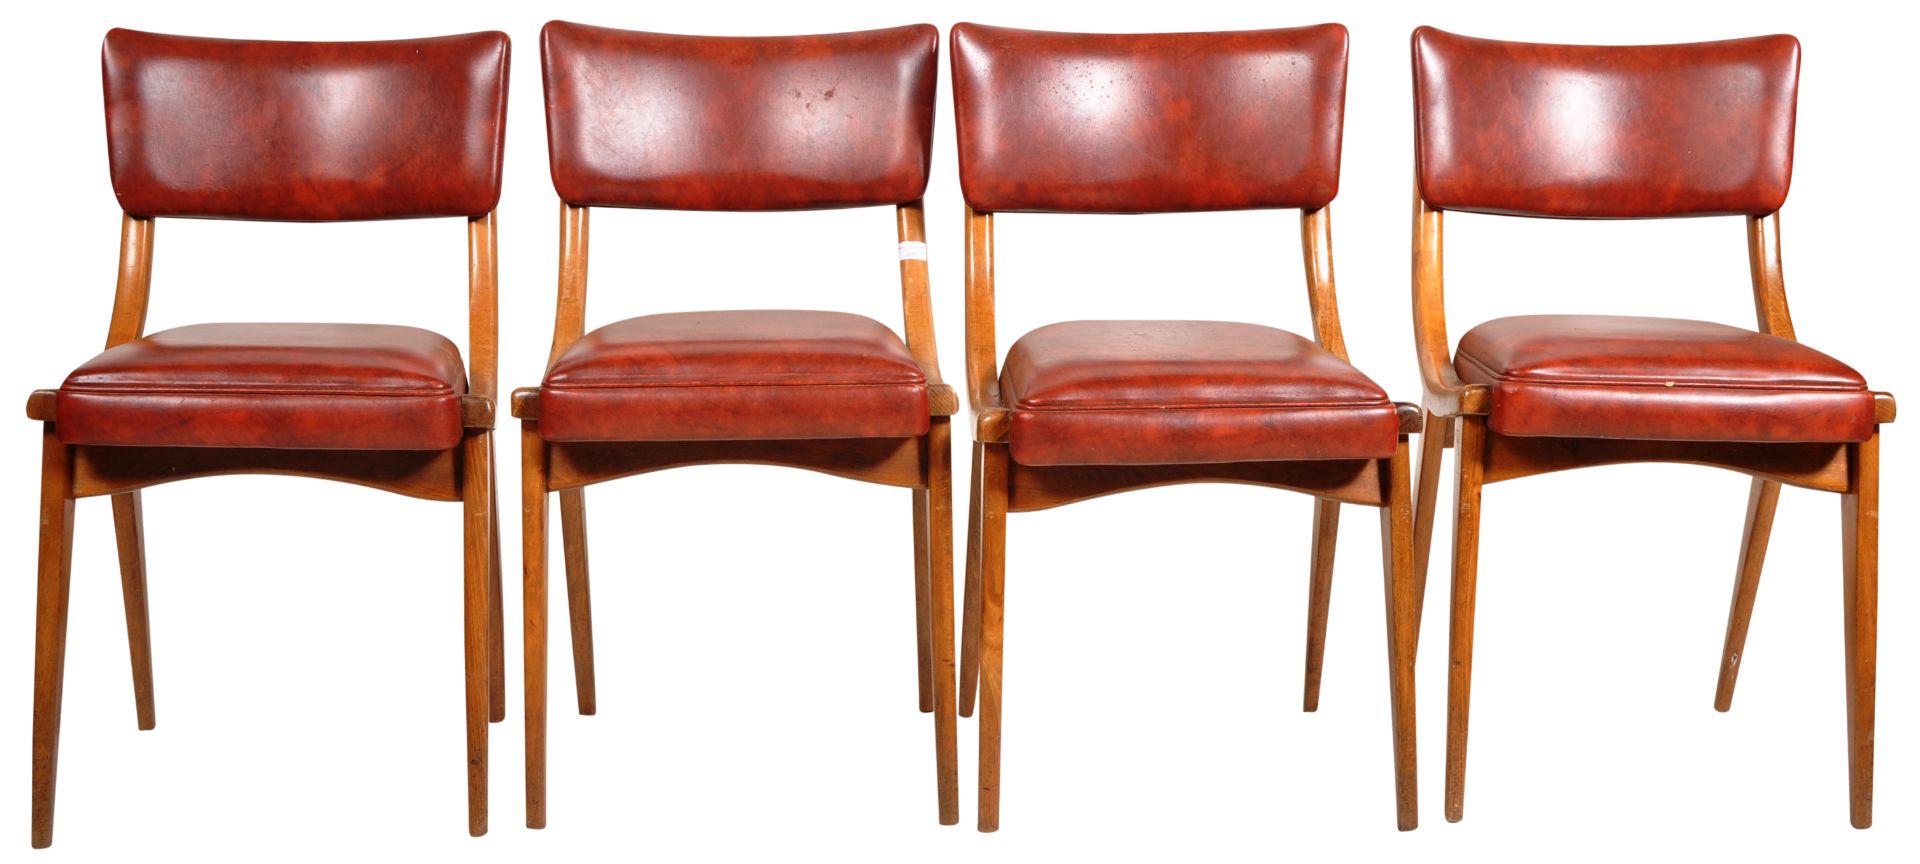 BEN CHAIRS - SET OF ORIGINAL 1960'S DINING CHAIRS